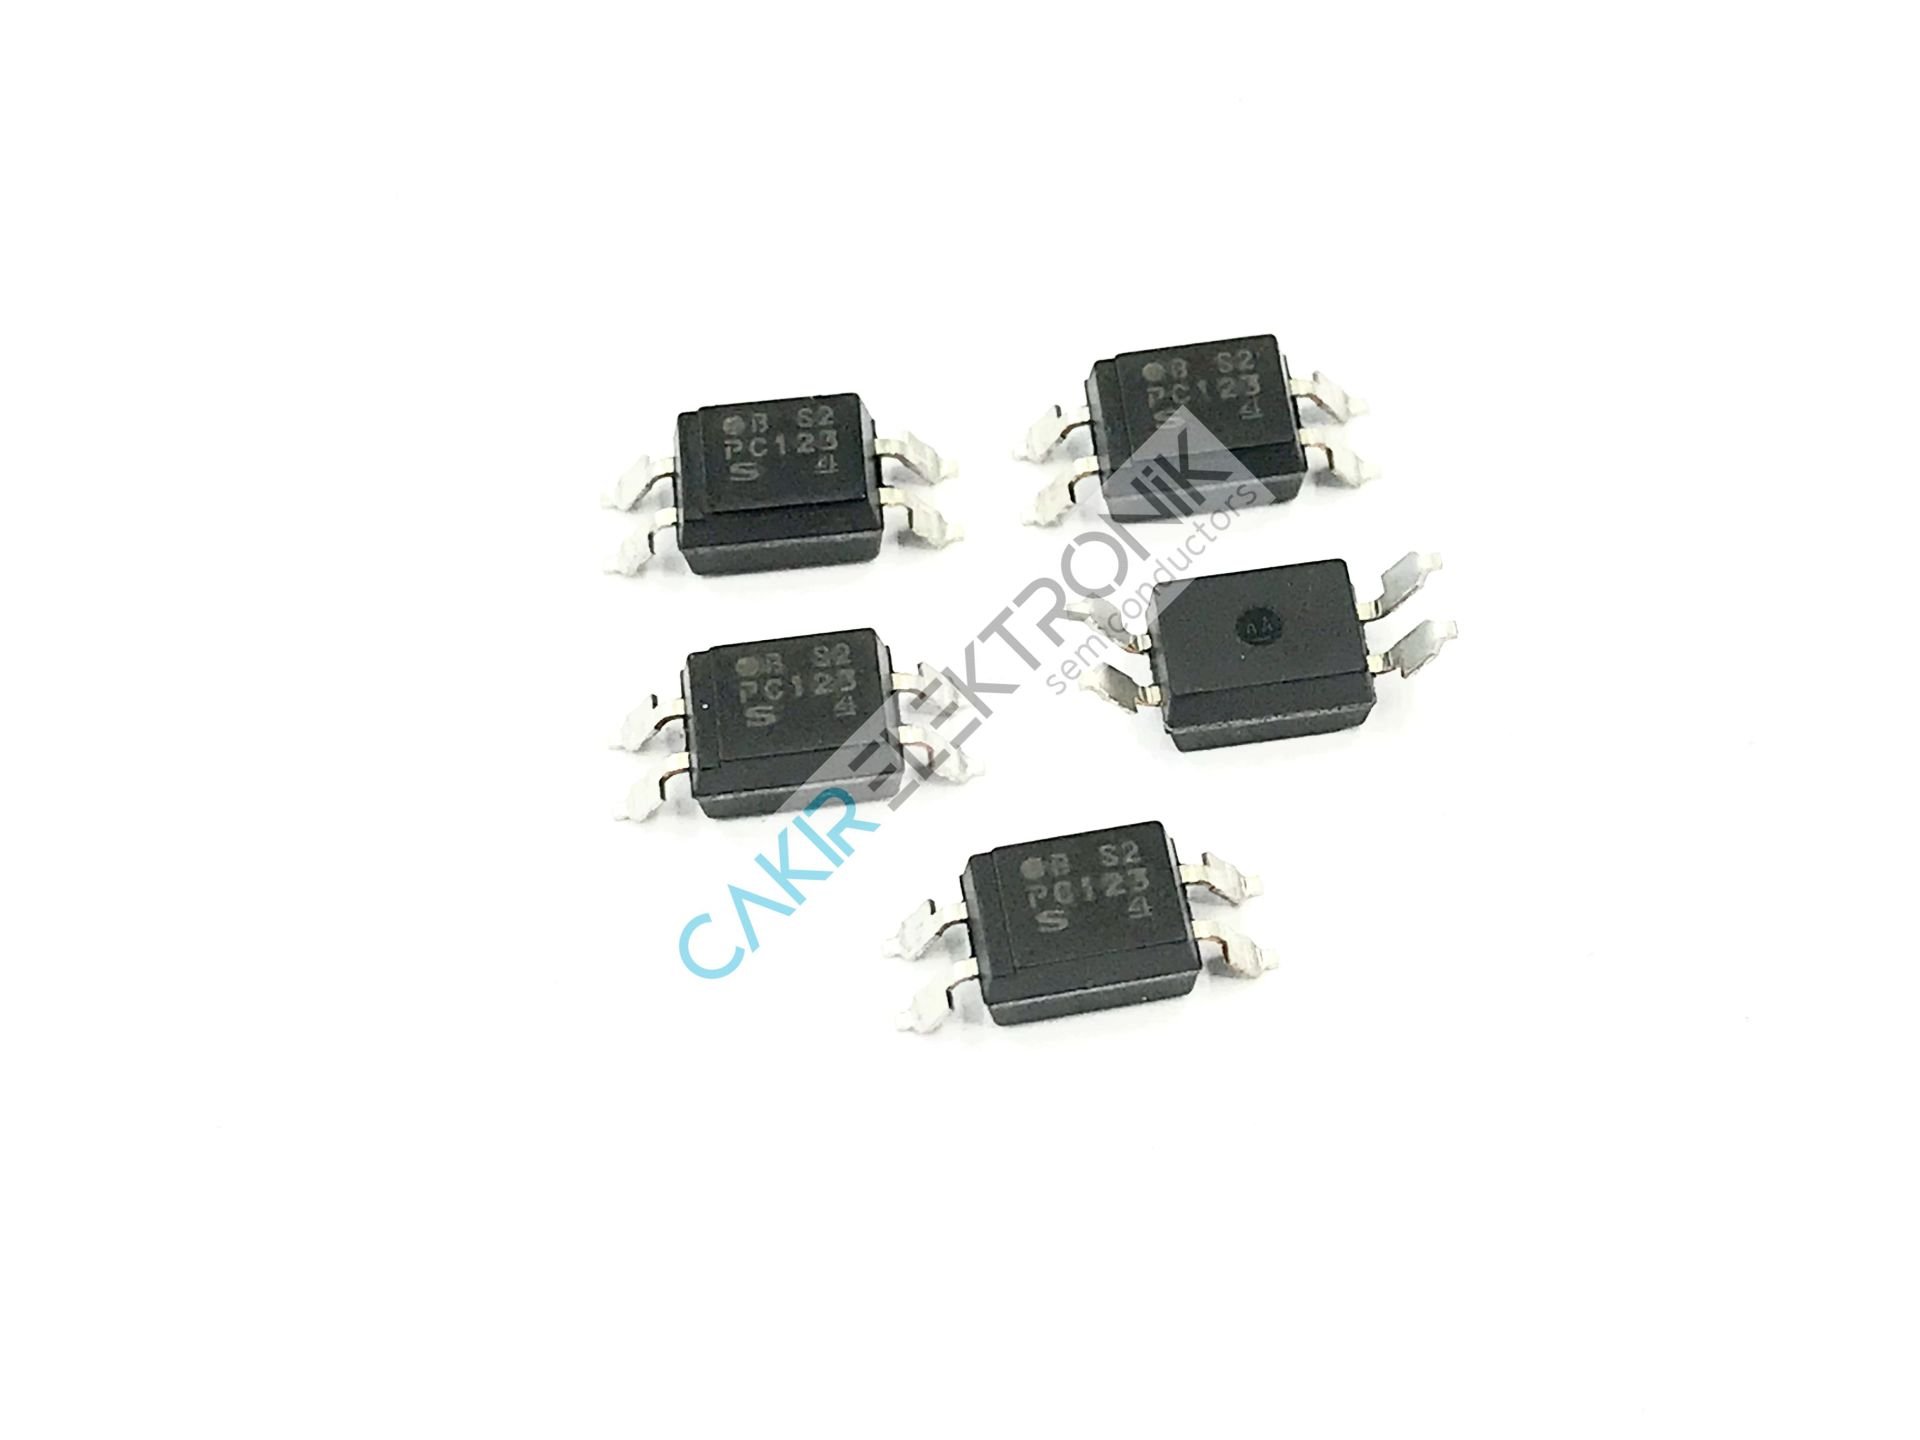 PC123 -  SMD 4pin Reinforced Insulation Type, High CMR, Low Input Current Photocoupler